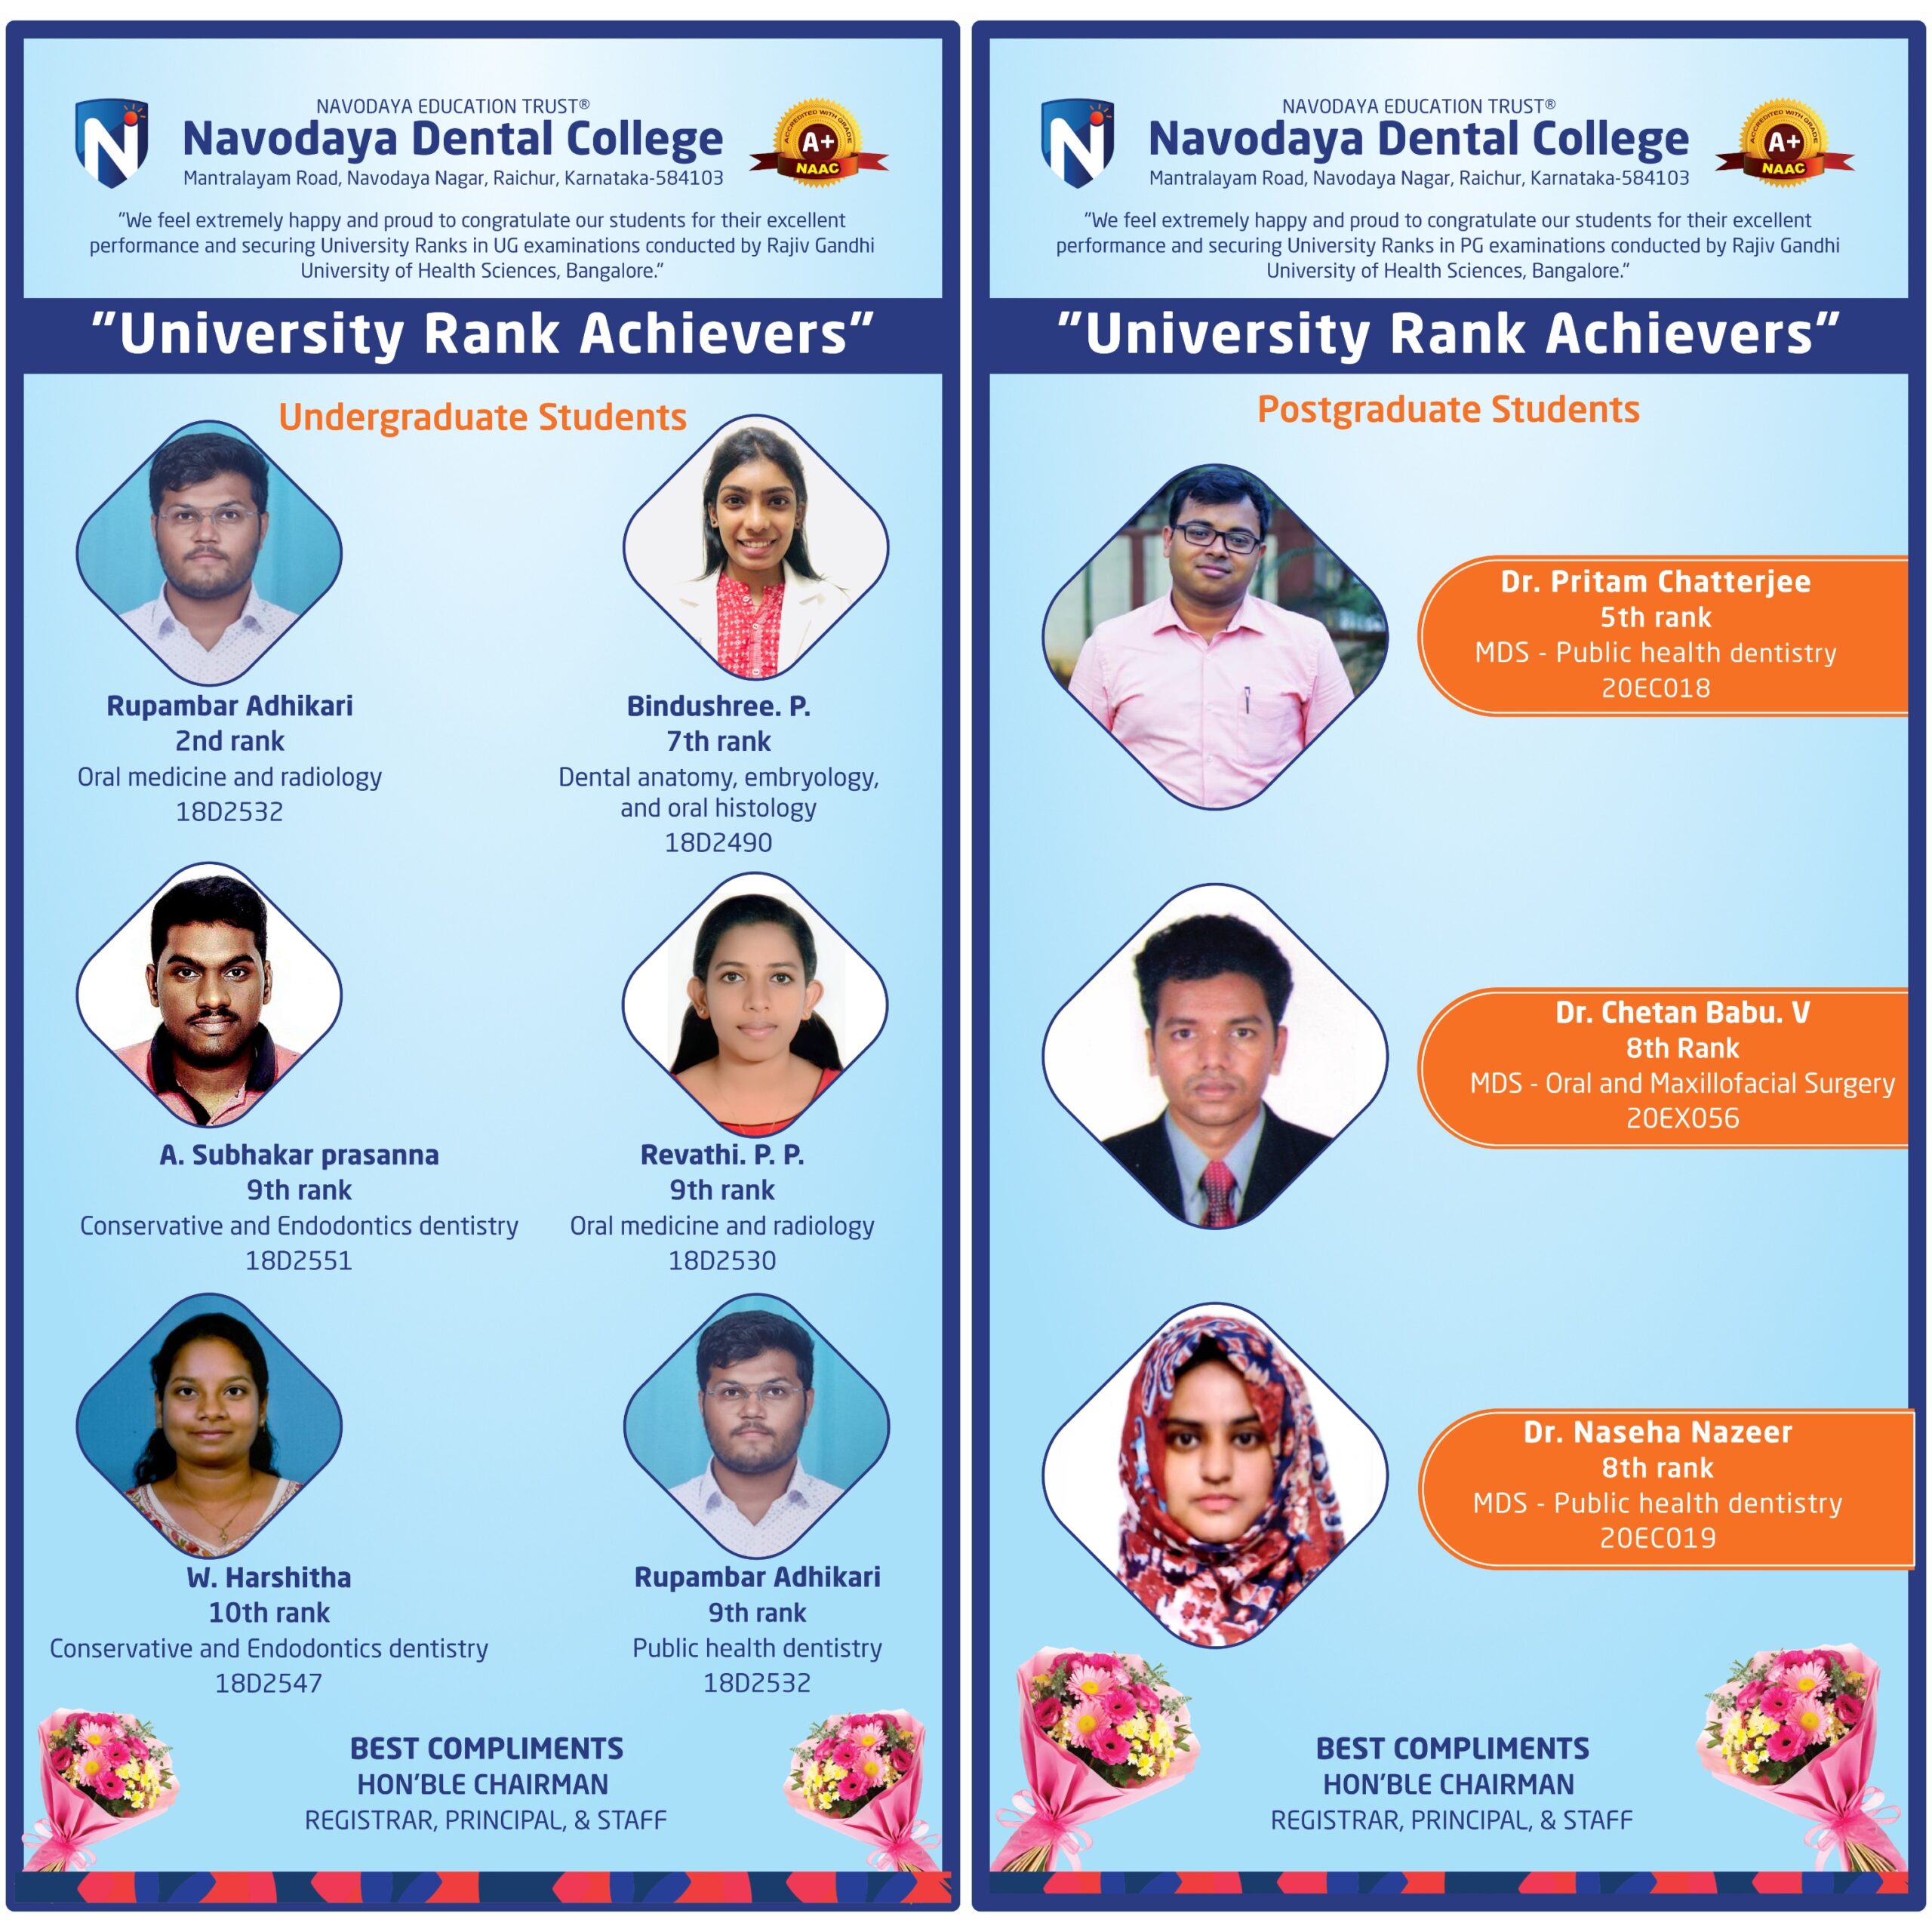 The Hon’ble Chairman, The Management of Navodaya Education Trust and the Principal of Navodaya Dental College, Raichur are immensely pleased and feeling very proud of our Under Graduate & Post Graduate Students Achievement